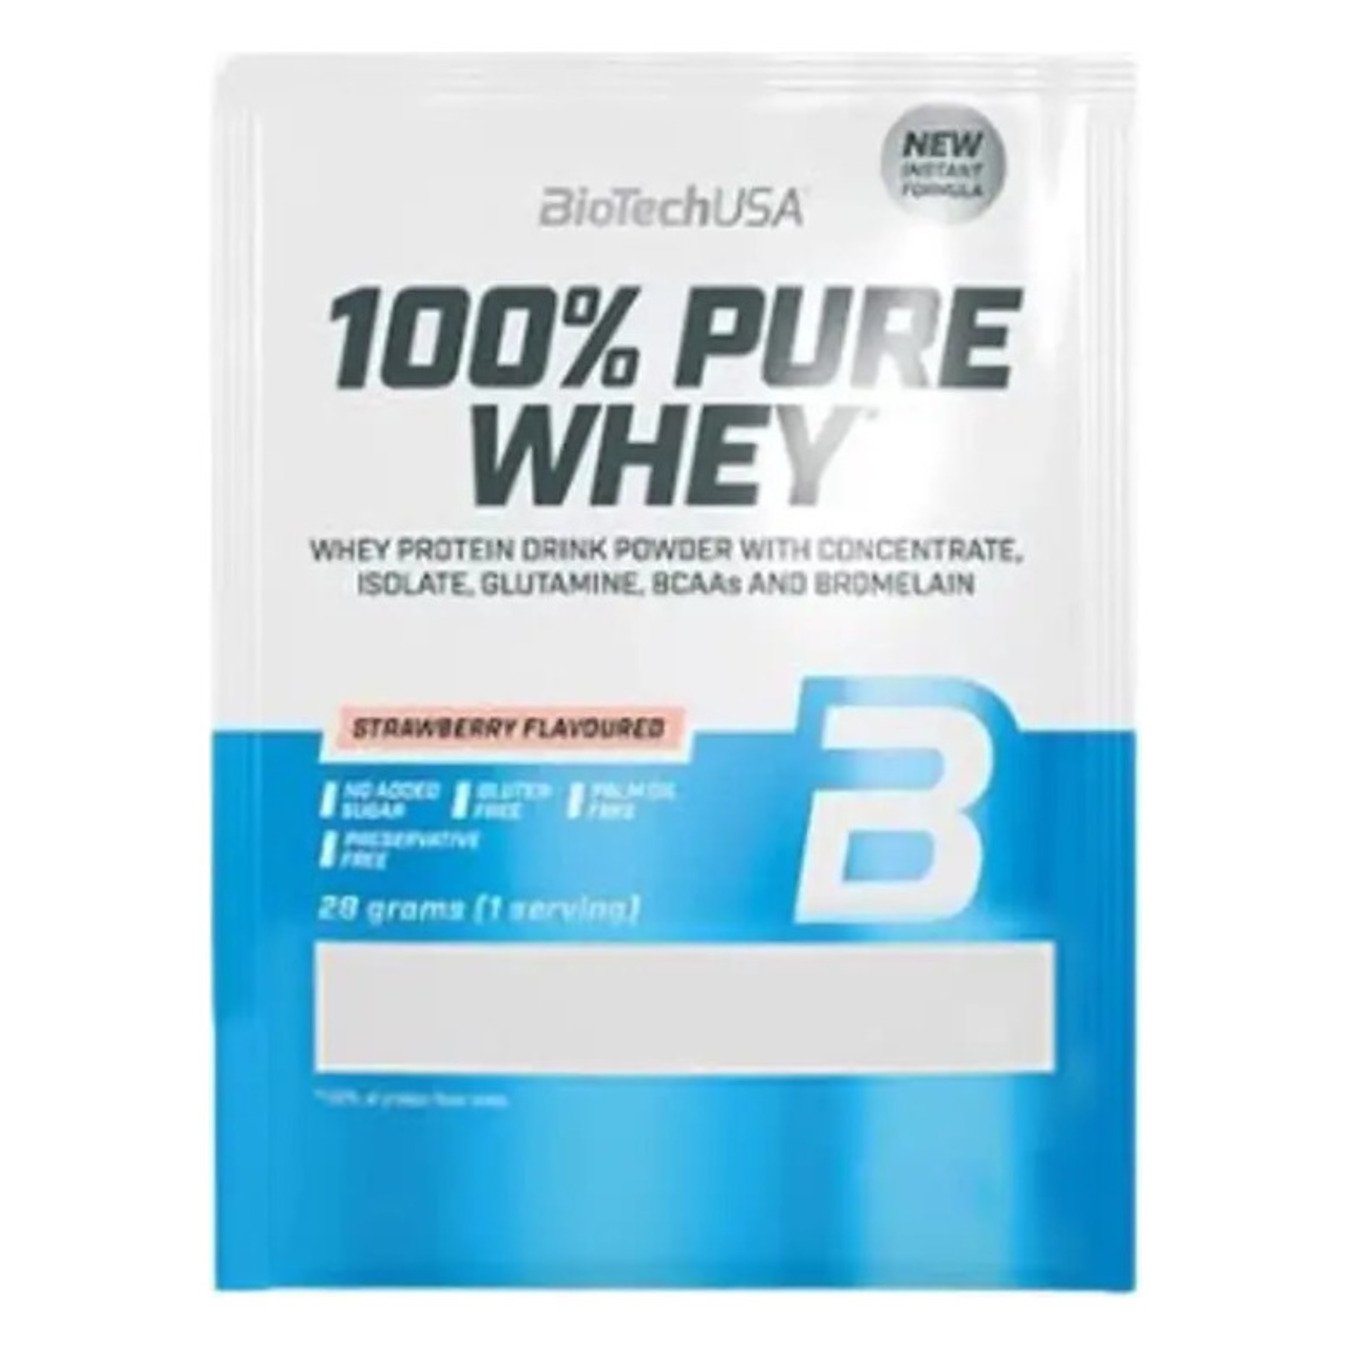 Protein Biotech Pure Whey 100% rice pudding 28g